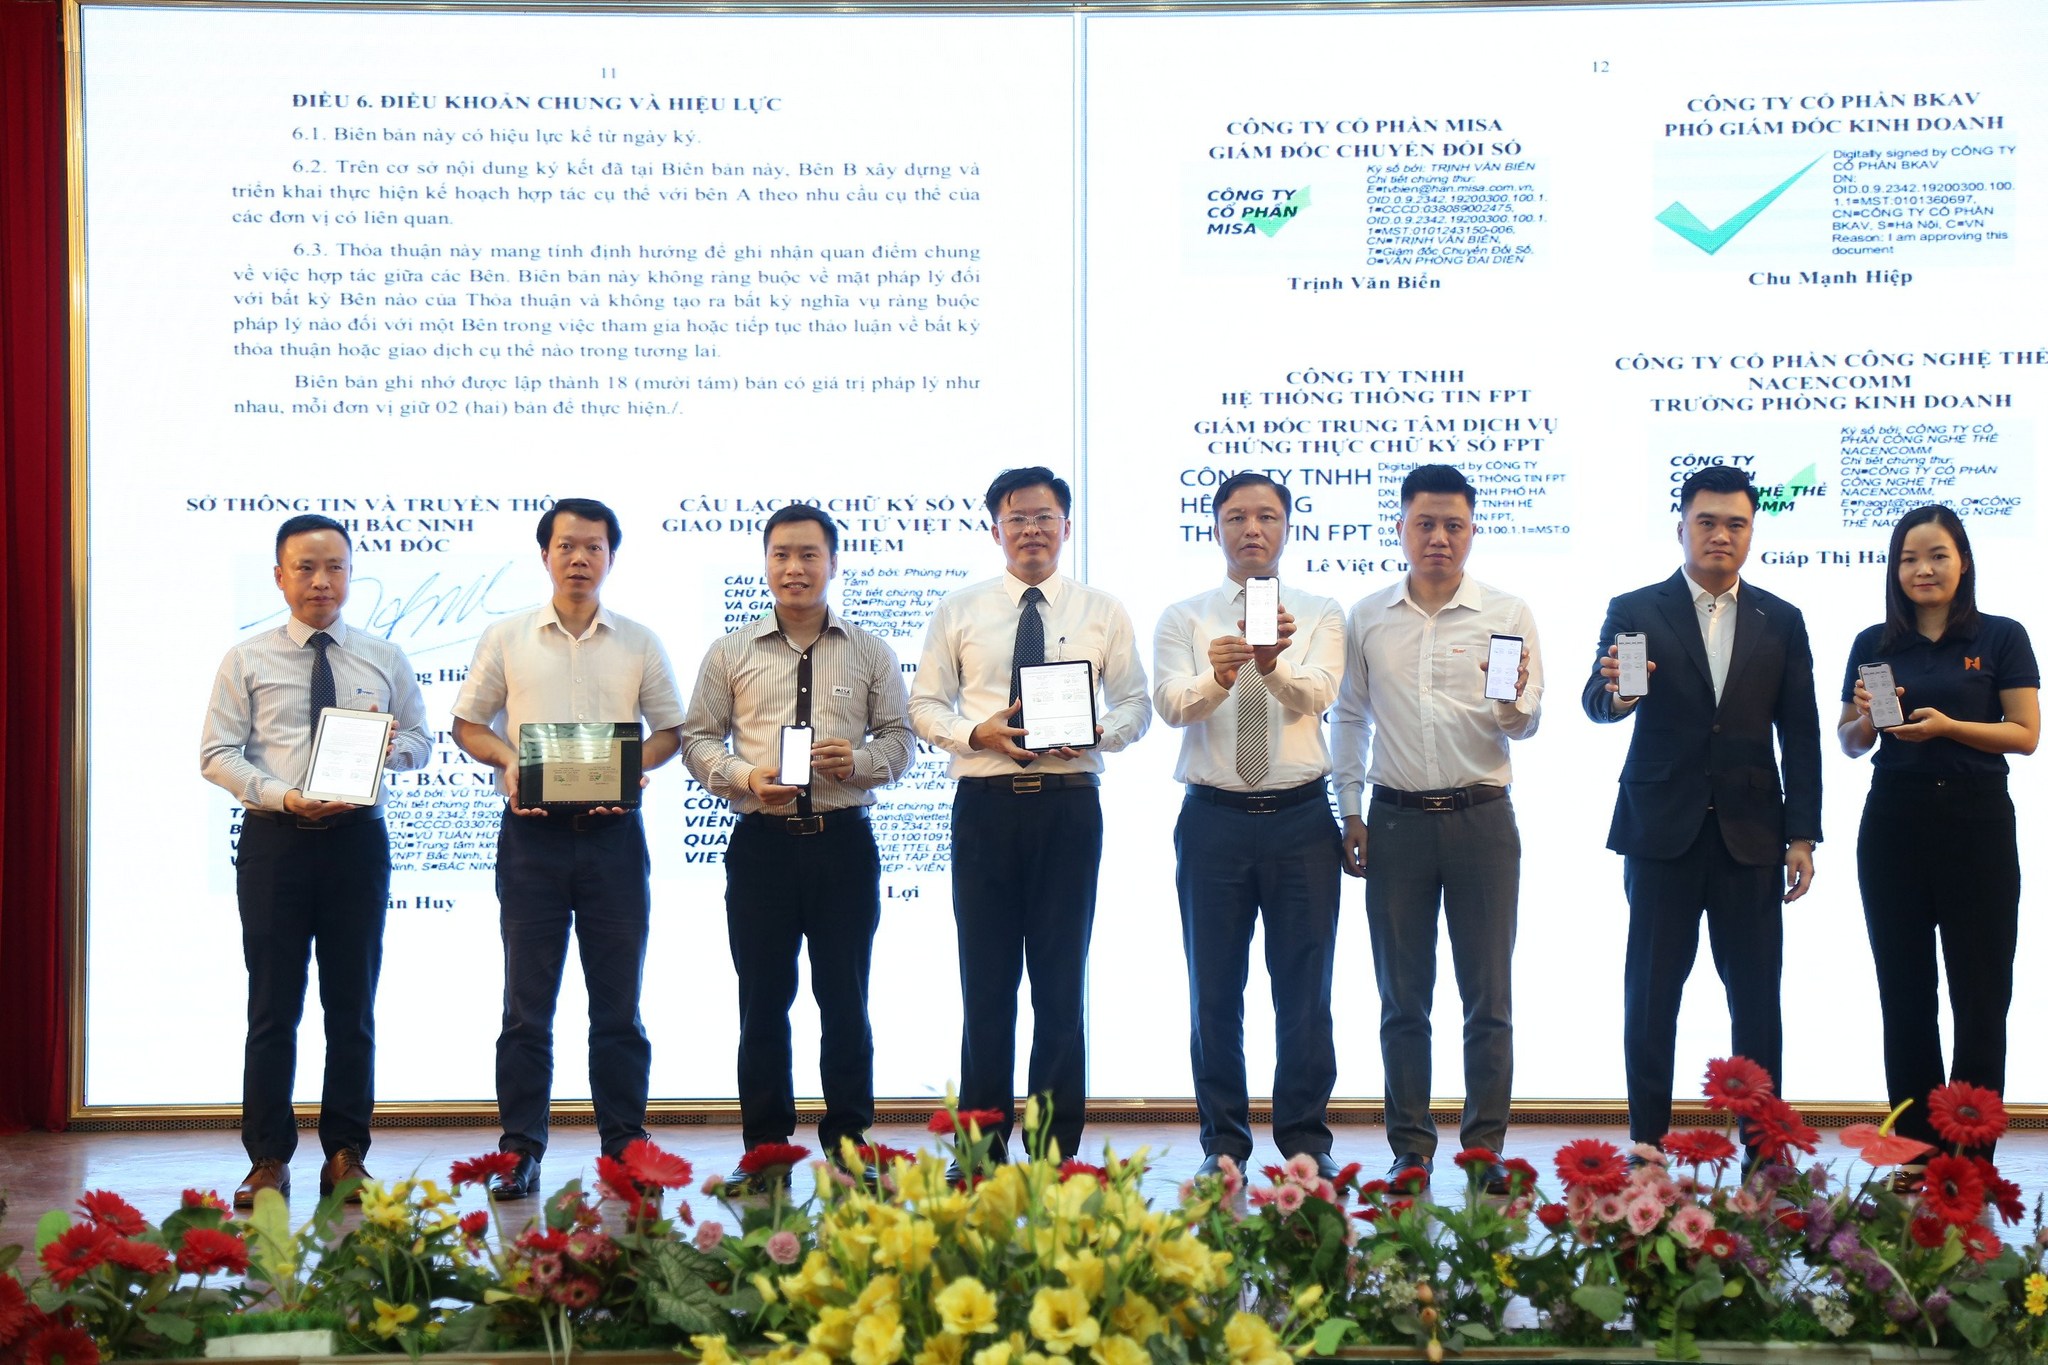 VNPT affirms its position in Digital Transformation Day in Bac Ninh province